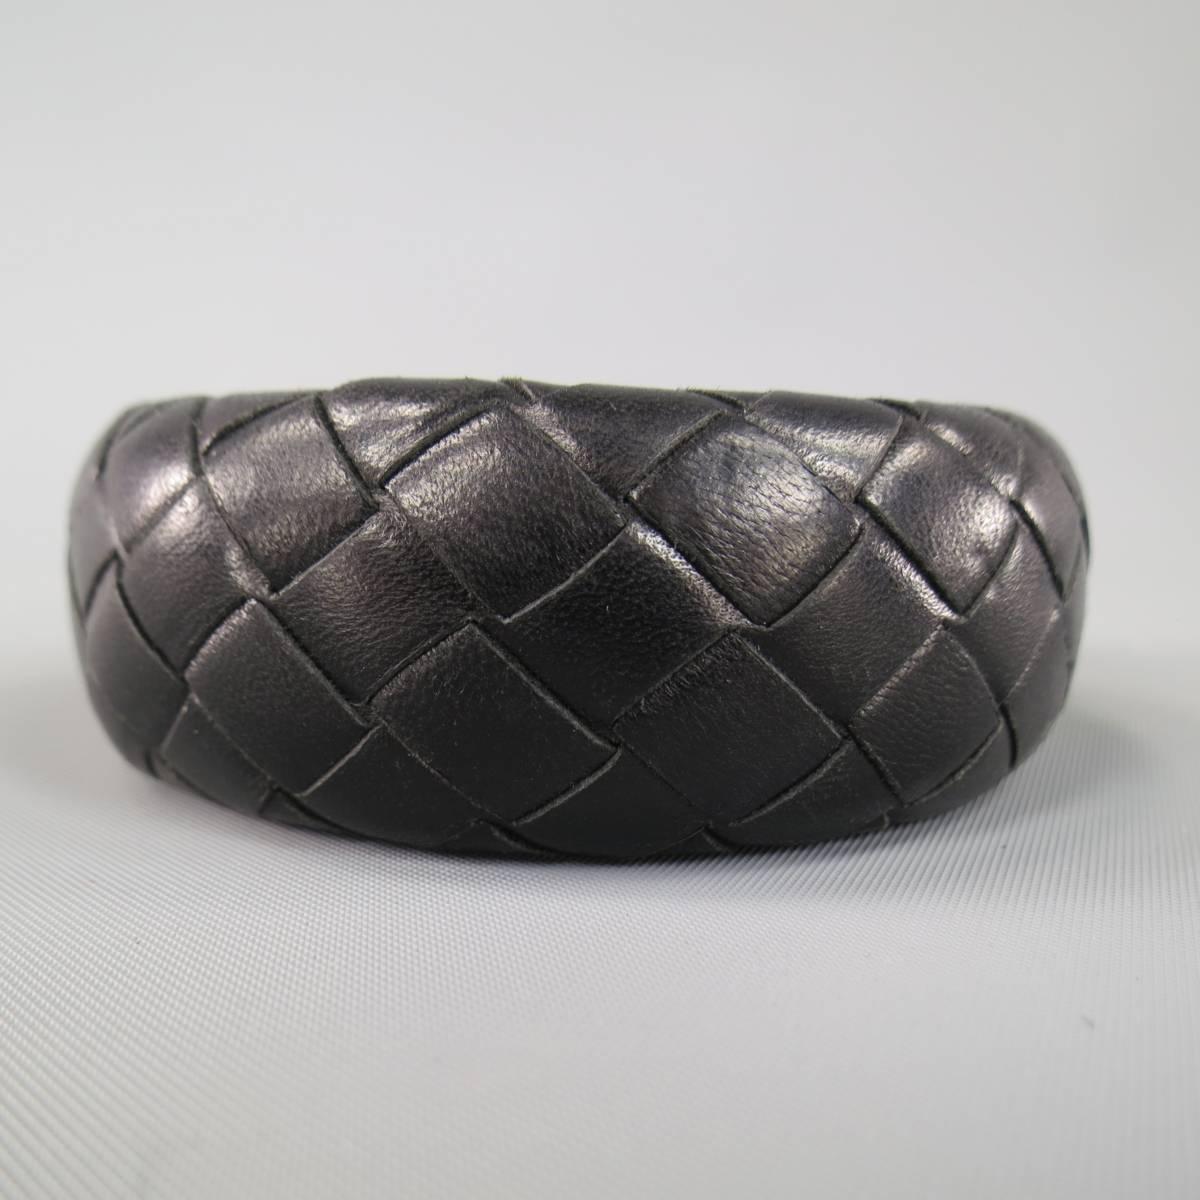 Classic Bottega Veneta bangle cuff bracelet in signature black Intrecciato woven leather. Minor wear on leather lining. As-Is. Made in Italy.
 
Good Pre-Owned Condition.
 
Fits: 7.5 in.